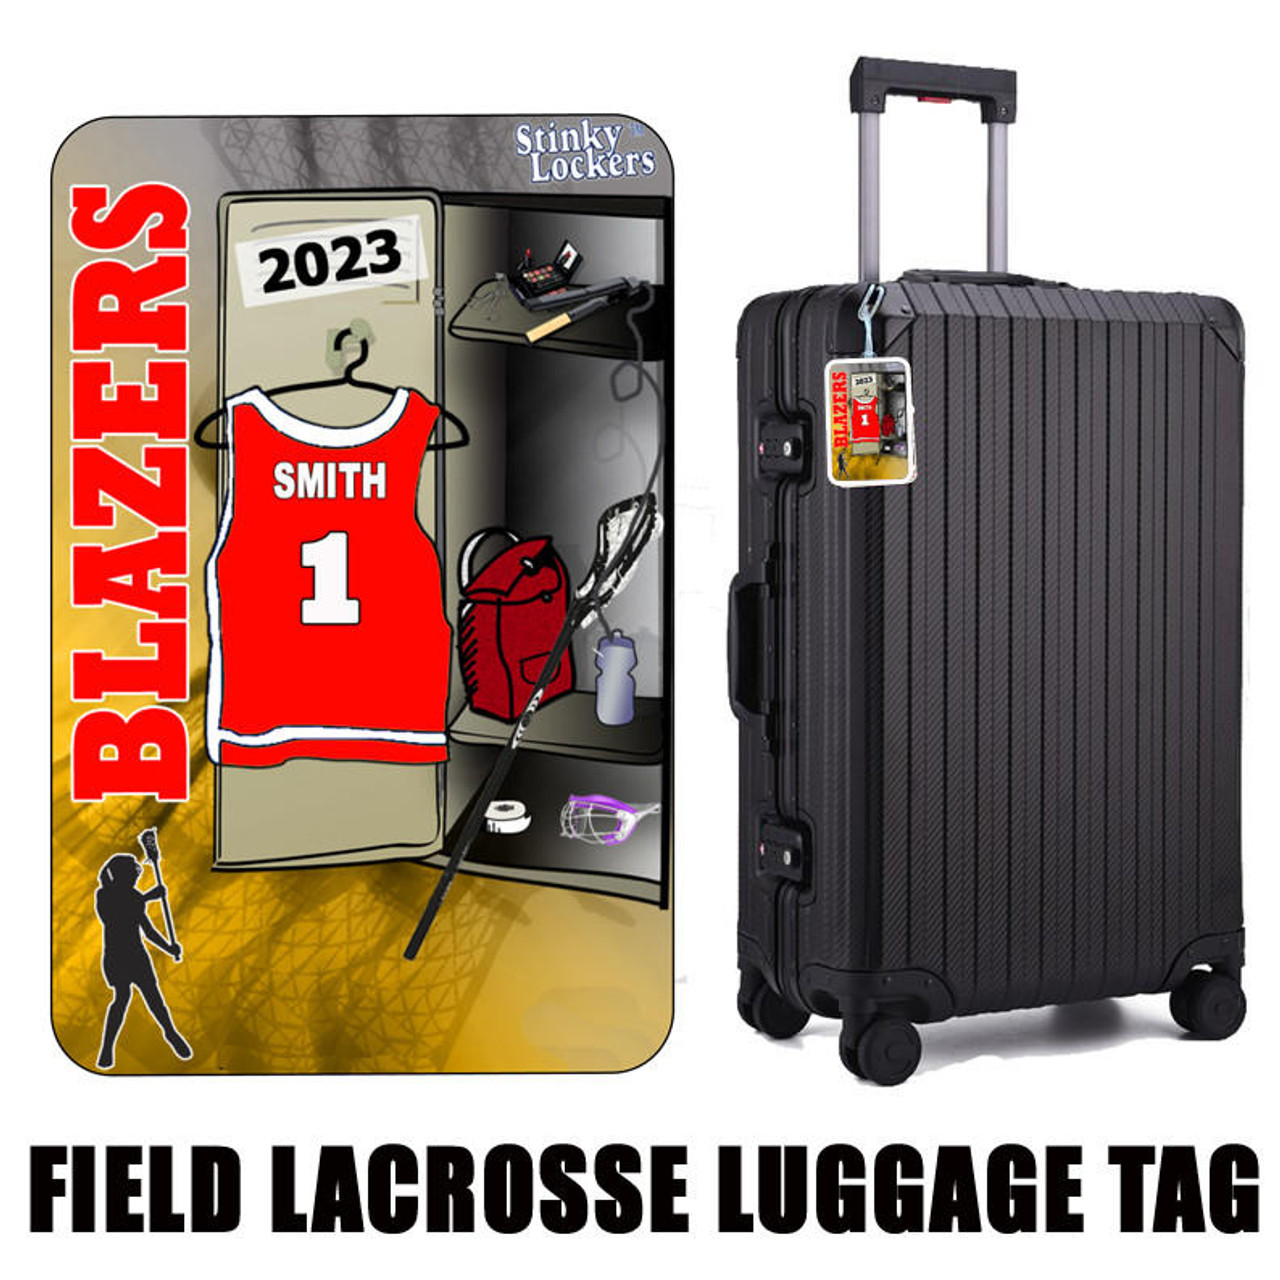 Stinky Lockers Personalized Field Lacrosse Luggage Bag Tag with Loop 